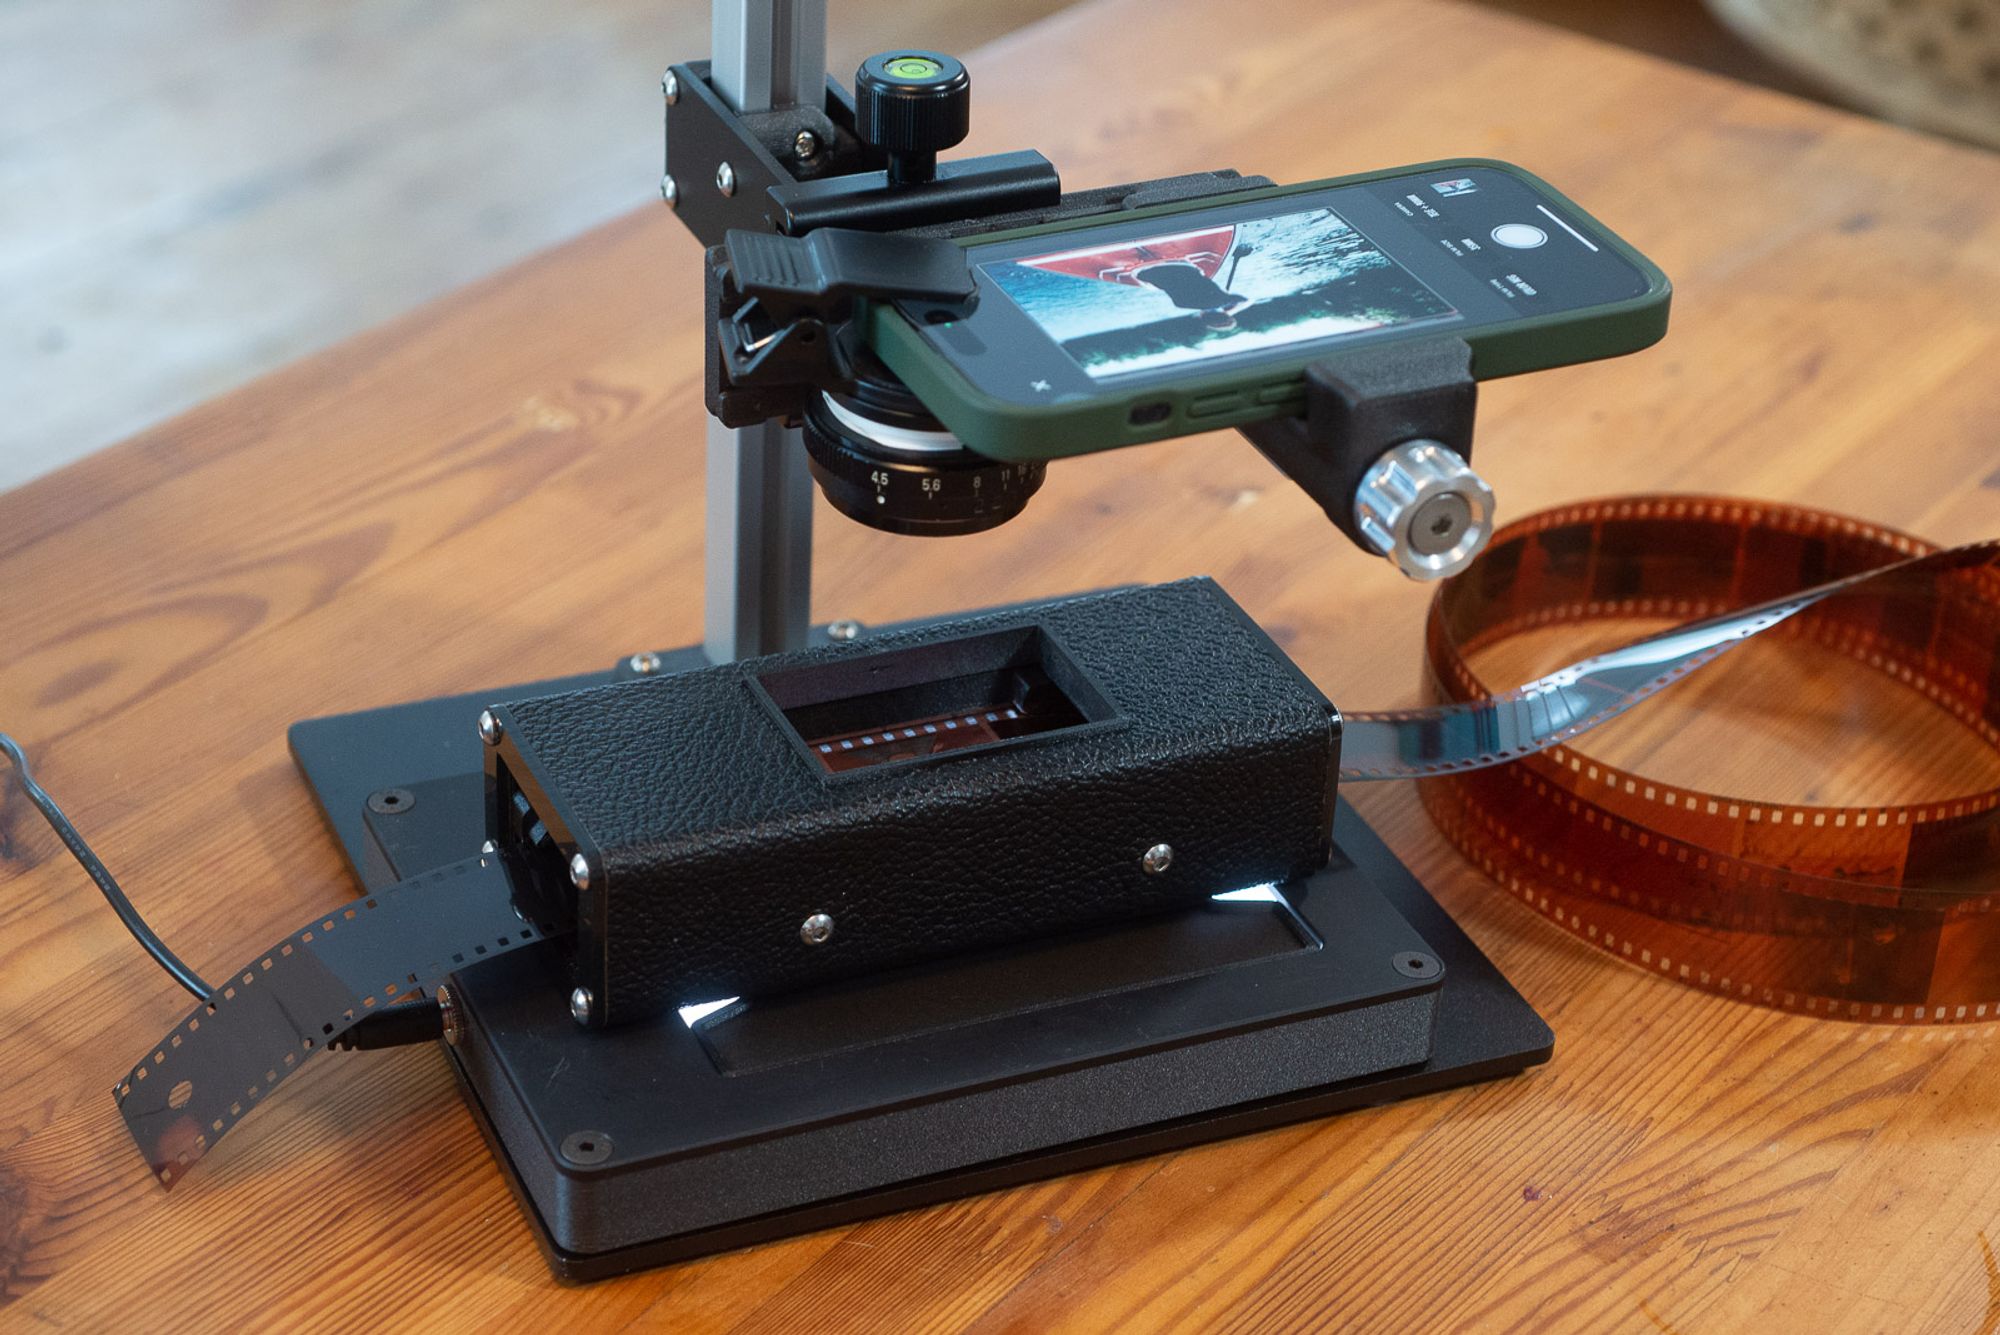 FilmLab 2.5 in a high quality mobile scanning setup. Equipment shown: Negative Supply Riser Mini, Basic 35mm Carrier, and Light Source Basic. Extra lens is a Tominon 90mm enlarger lens adapted to fit a 37mm clip.